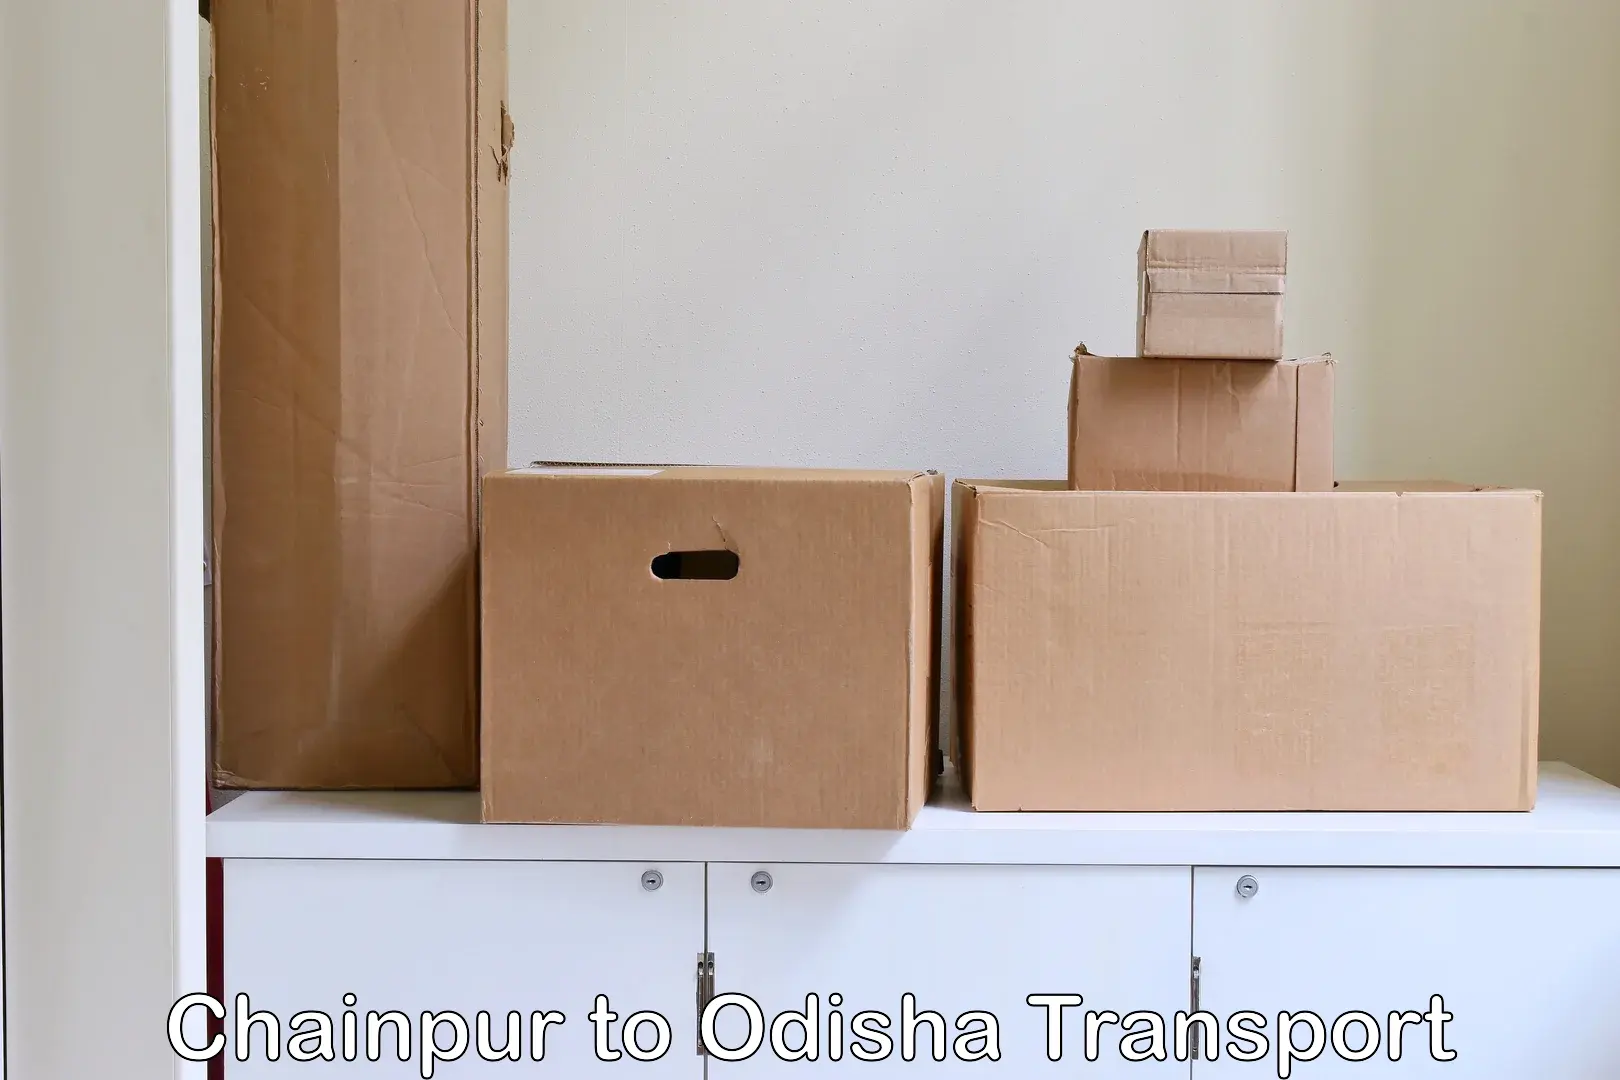 Domestic goods transportation services in Chainpur to Rairangpur